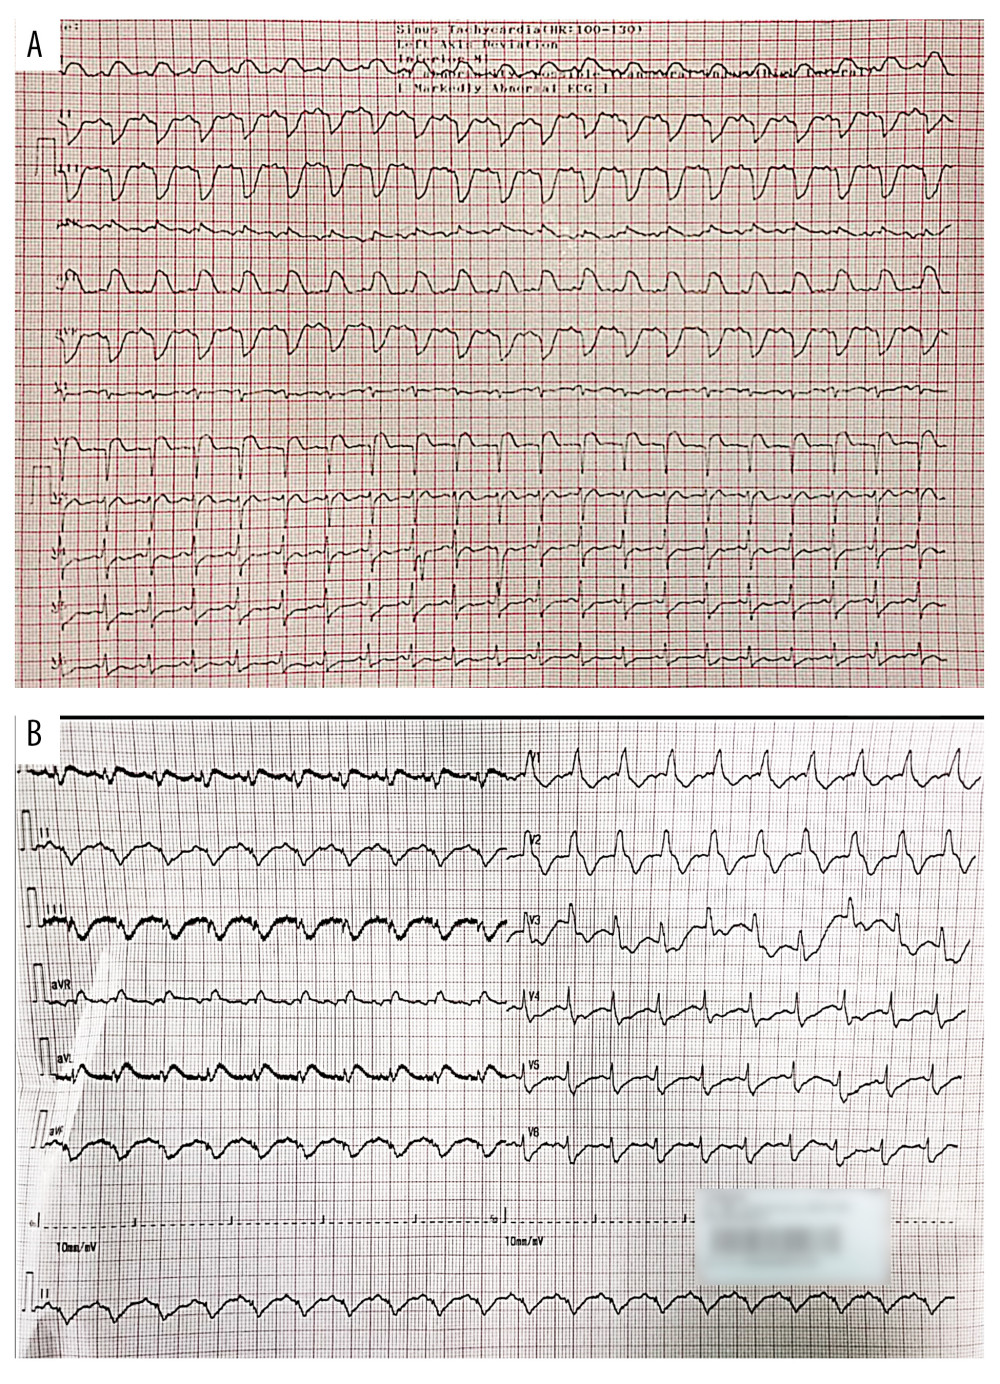 (A) Electrocardiography pre-thrombolytic showed ST-elevation in leads I and aVL with reciprocal ST depression in leads II, III, and aVF. (B) Post-thrombolytic ECG showed ST-elevation in leads I and aVL with right bundle branch block pattern.